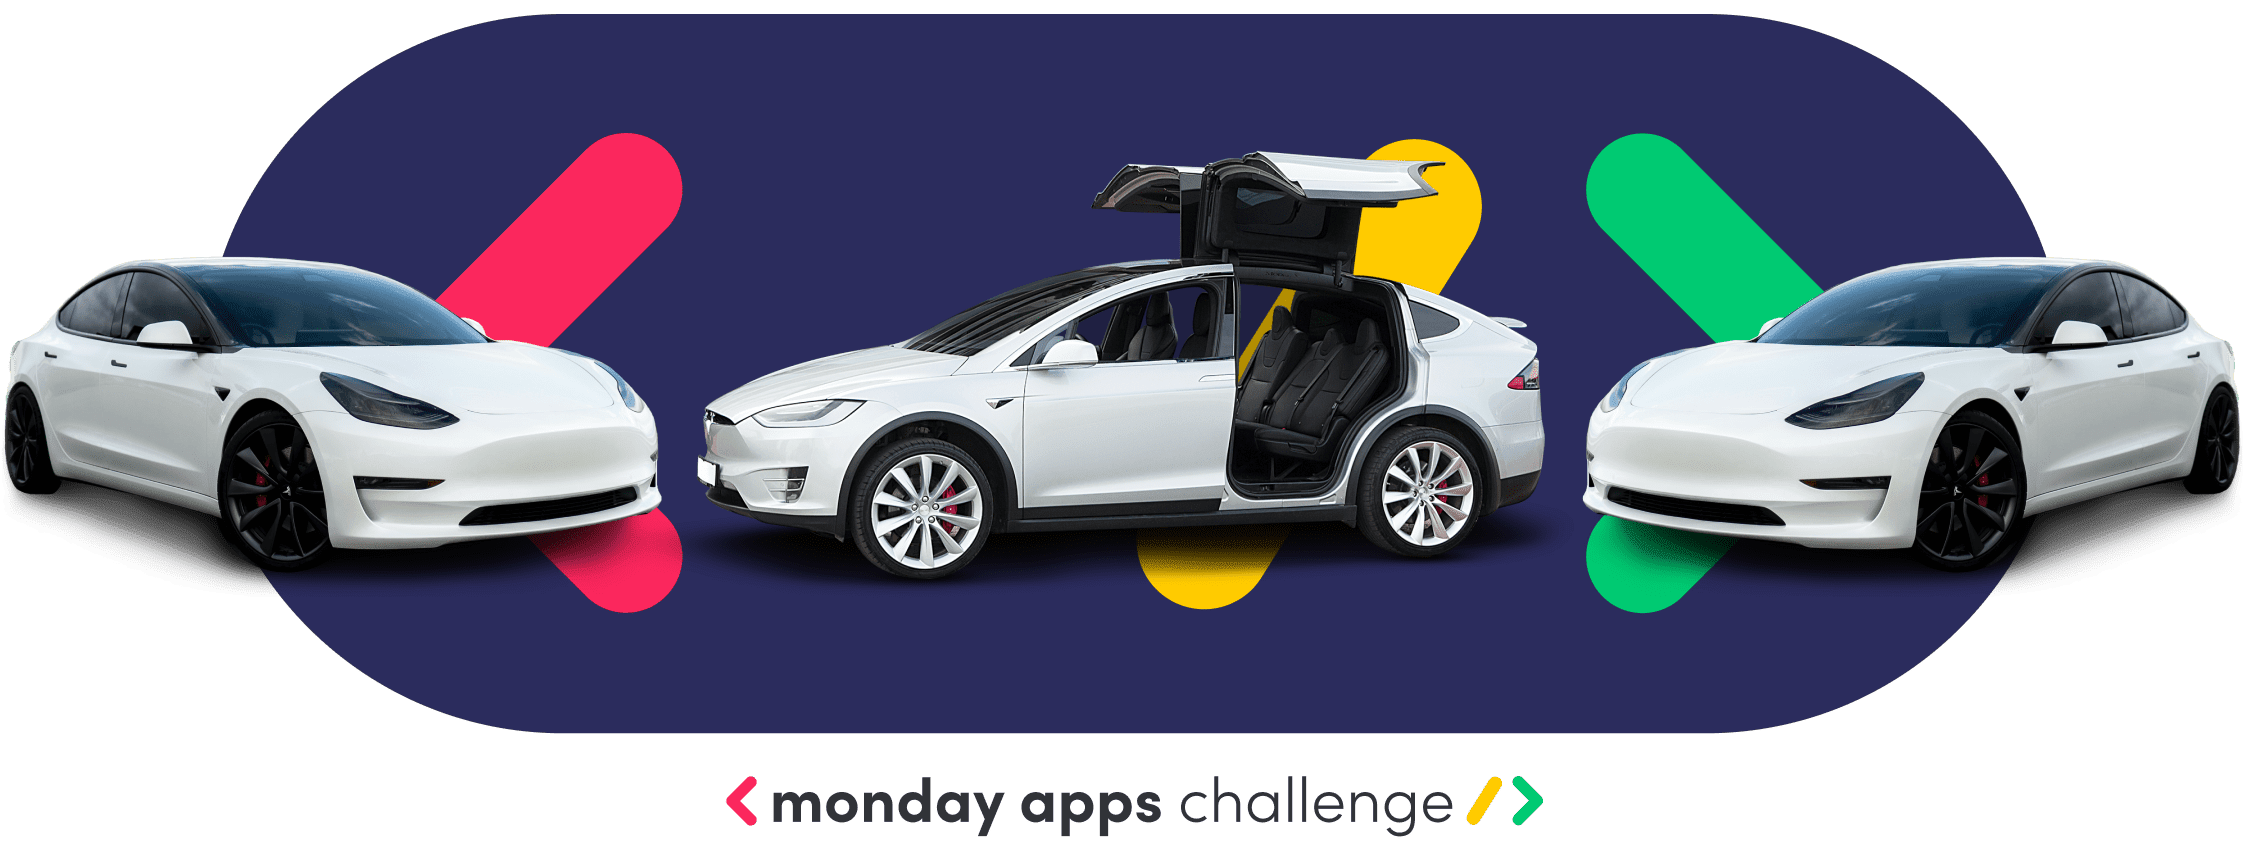 Three teslas positioned behind the monday.com apps logo